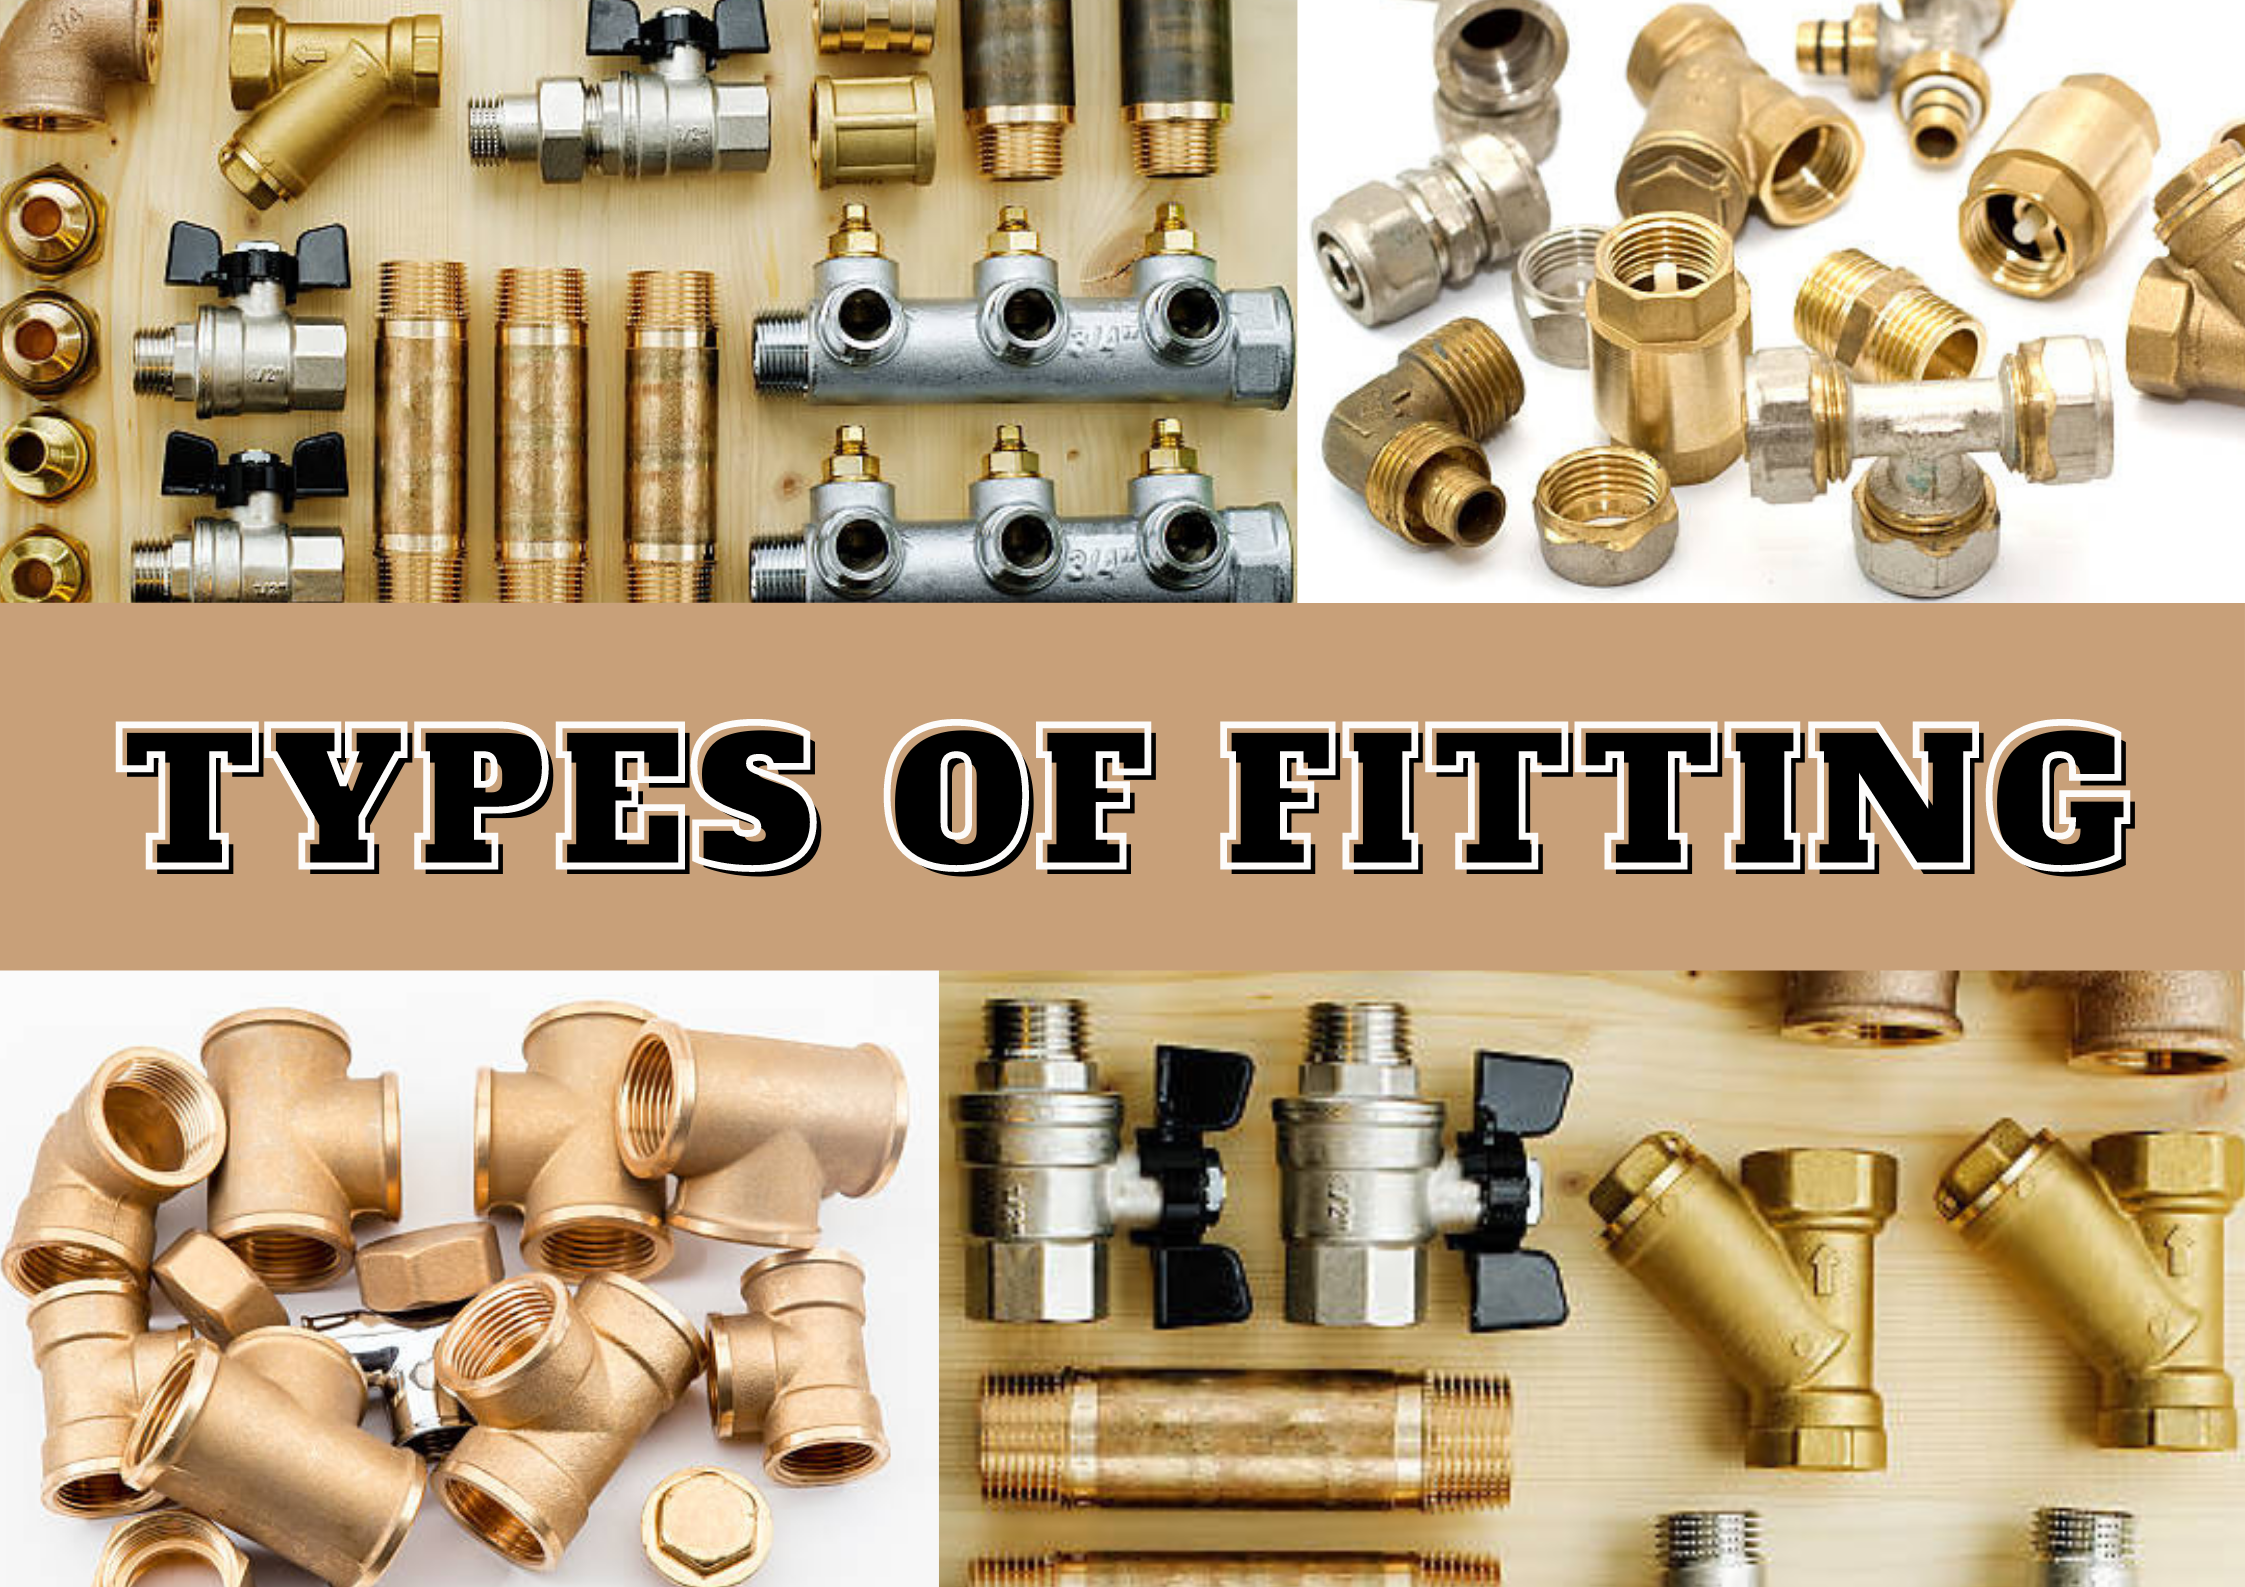 Types of fitting